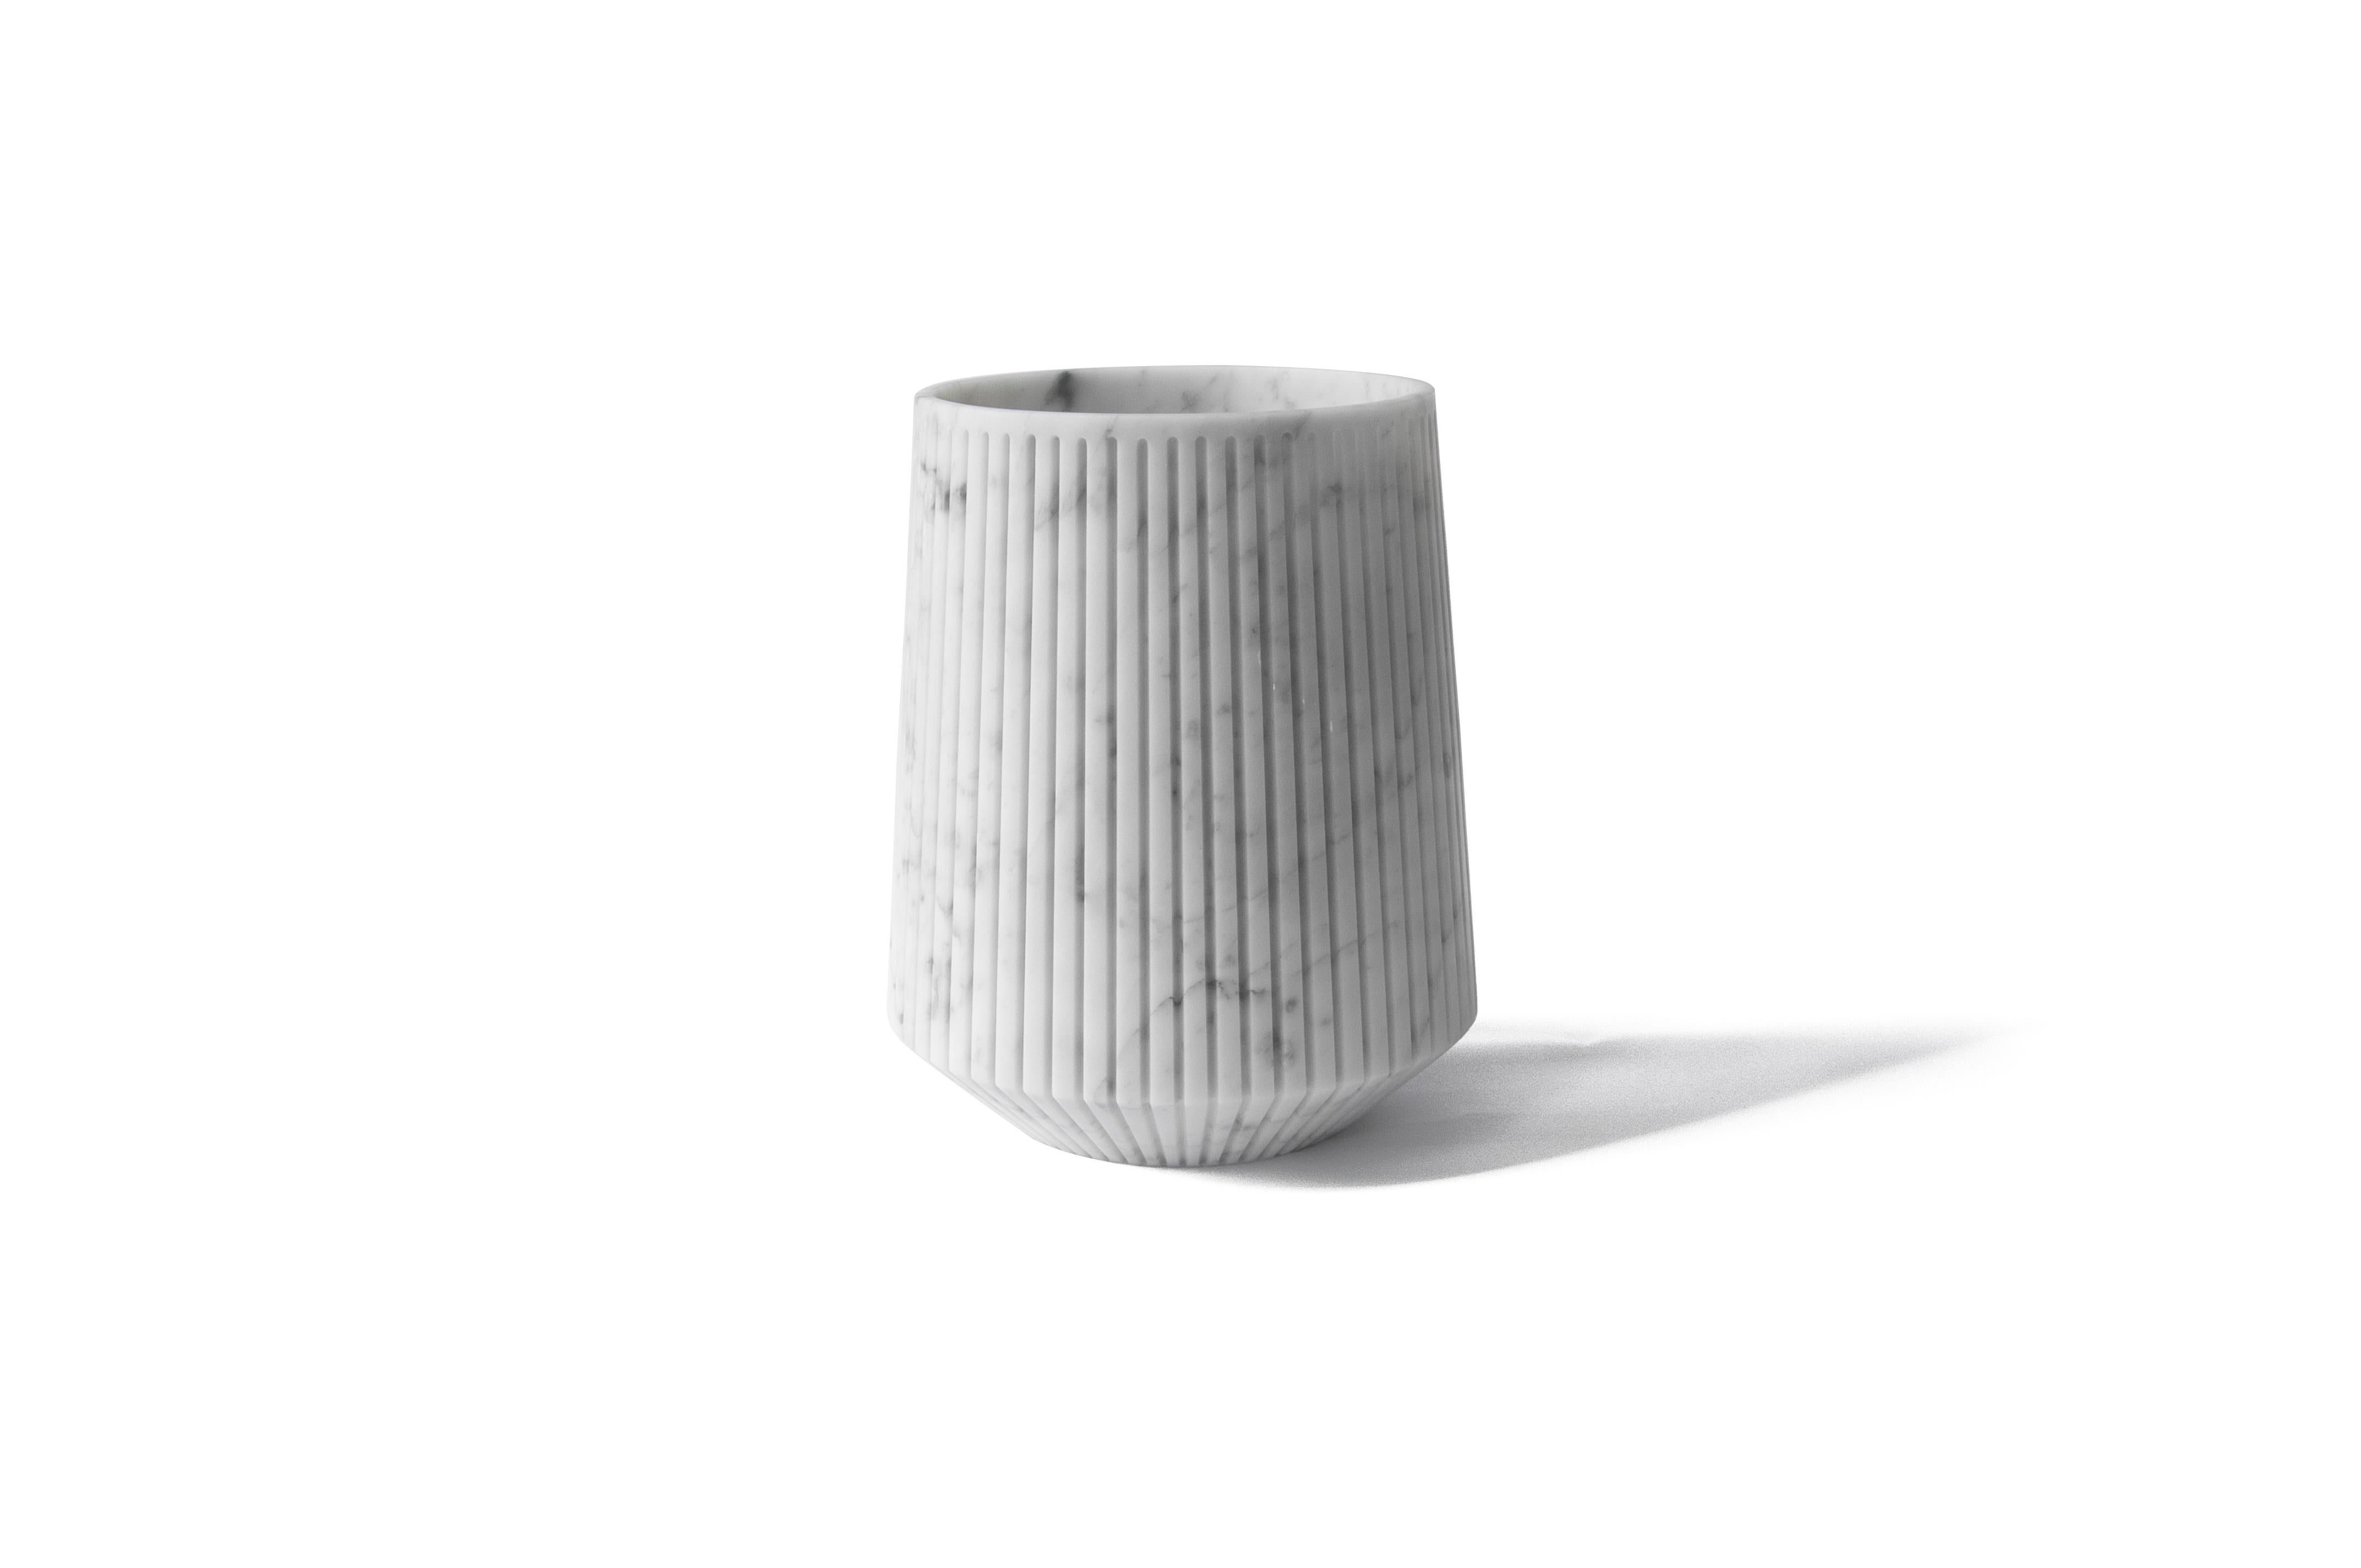 Striped wide vase in white Carrara marble.
-Jacopo Simonetti design for FiammettaV-
Each piece is in a way unique (every marble block is different in veins and shades) and handmade by Italian artisans specialized over generations in processing